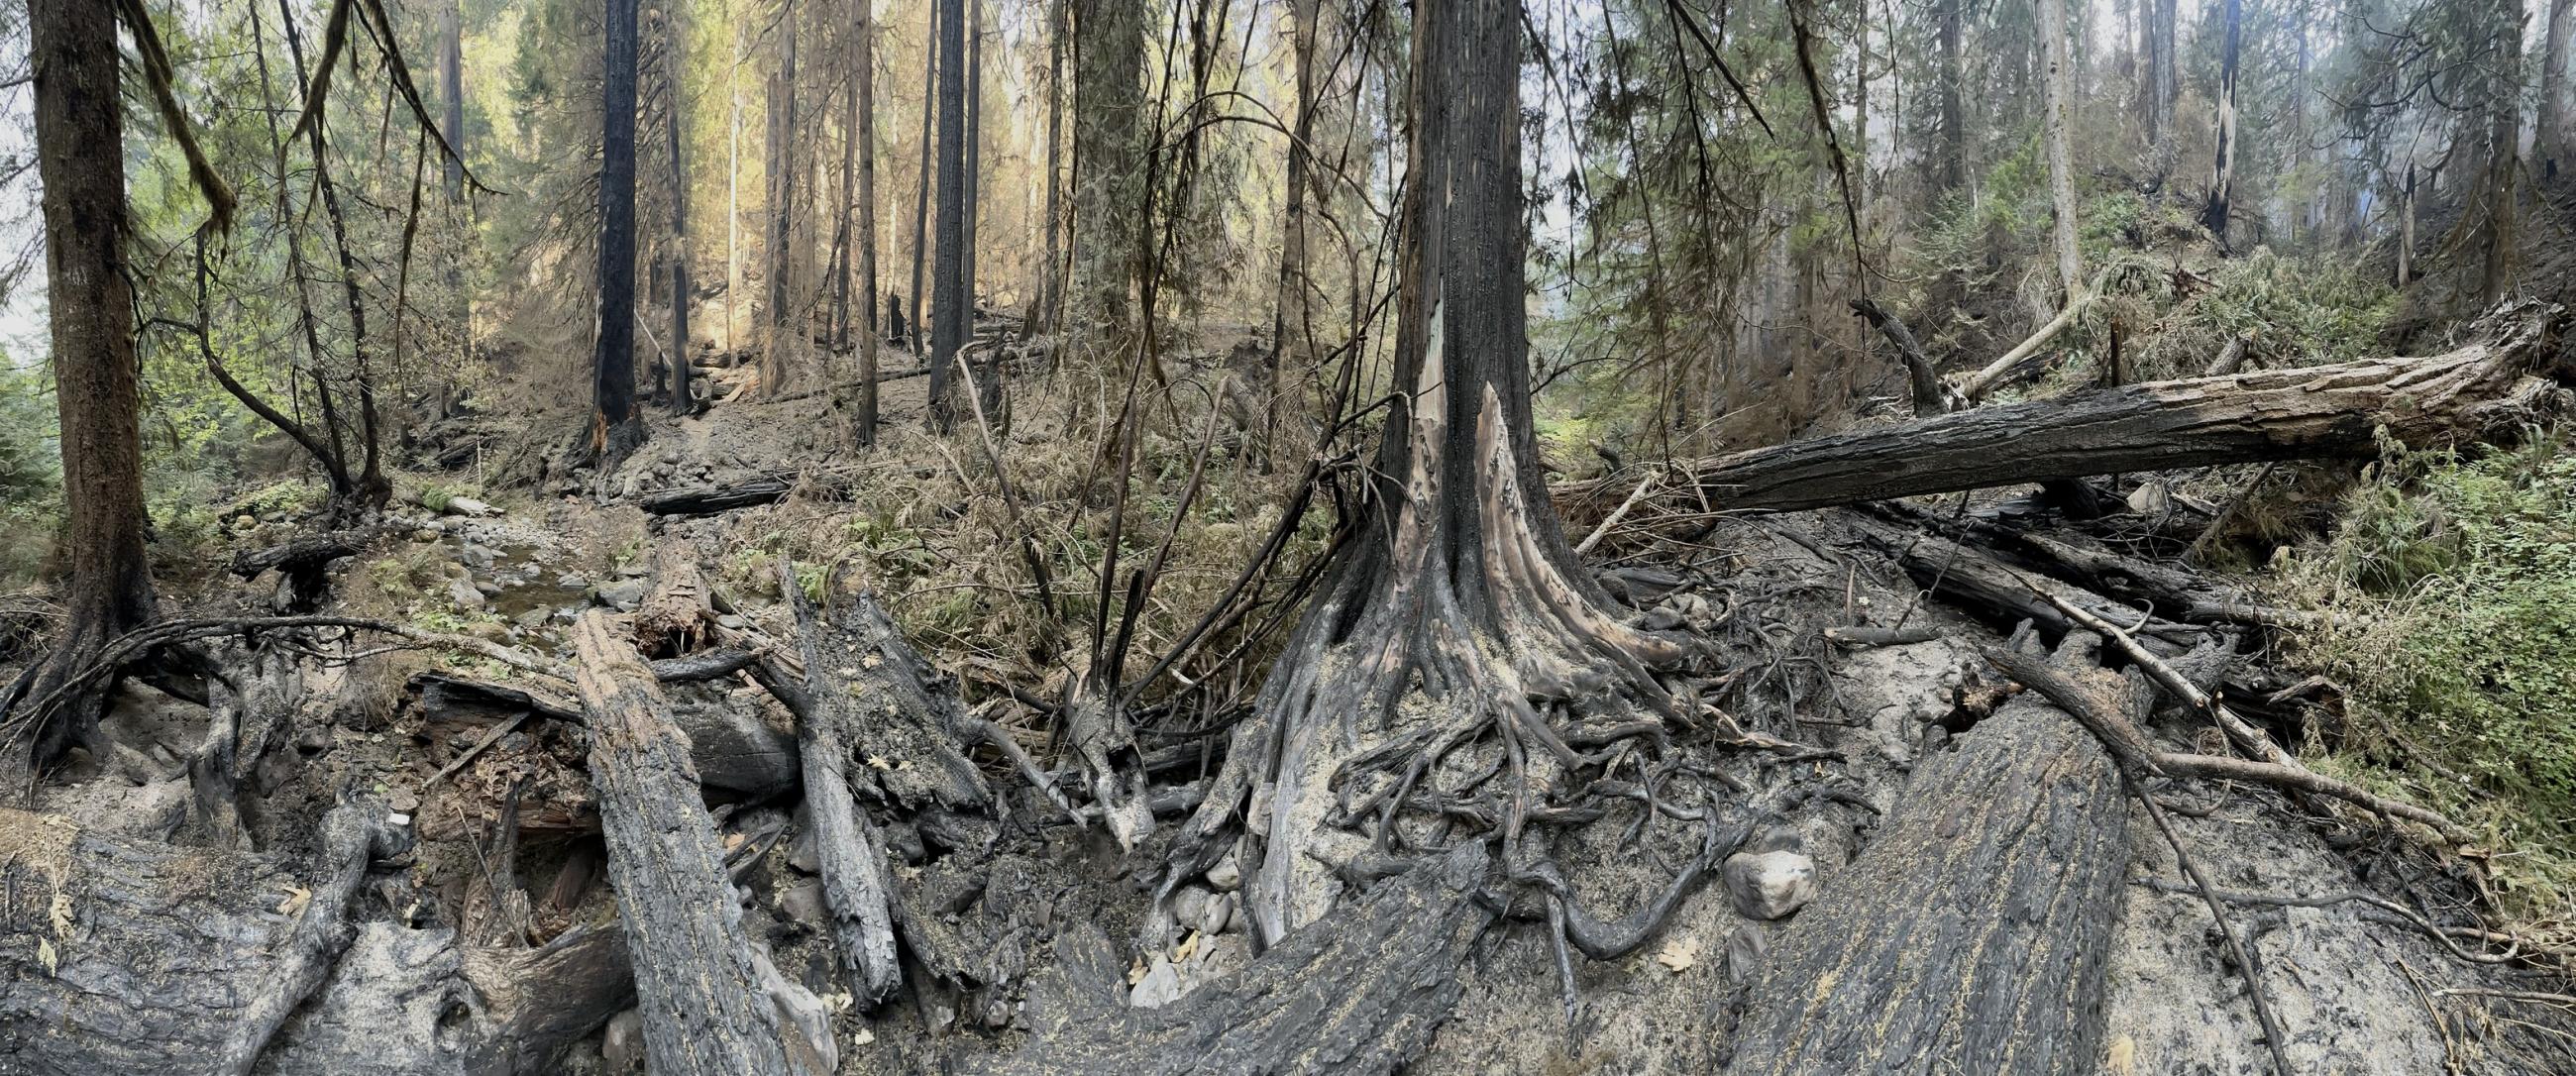 This is an image of burned trees in the HJ Andrews Forest